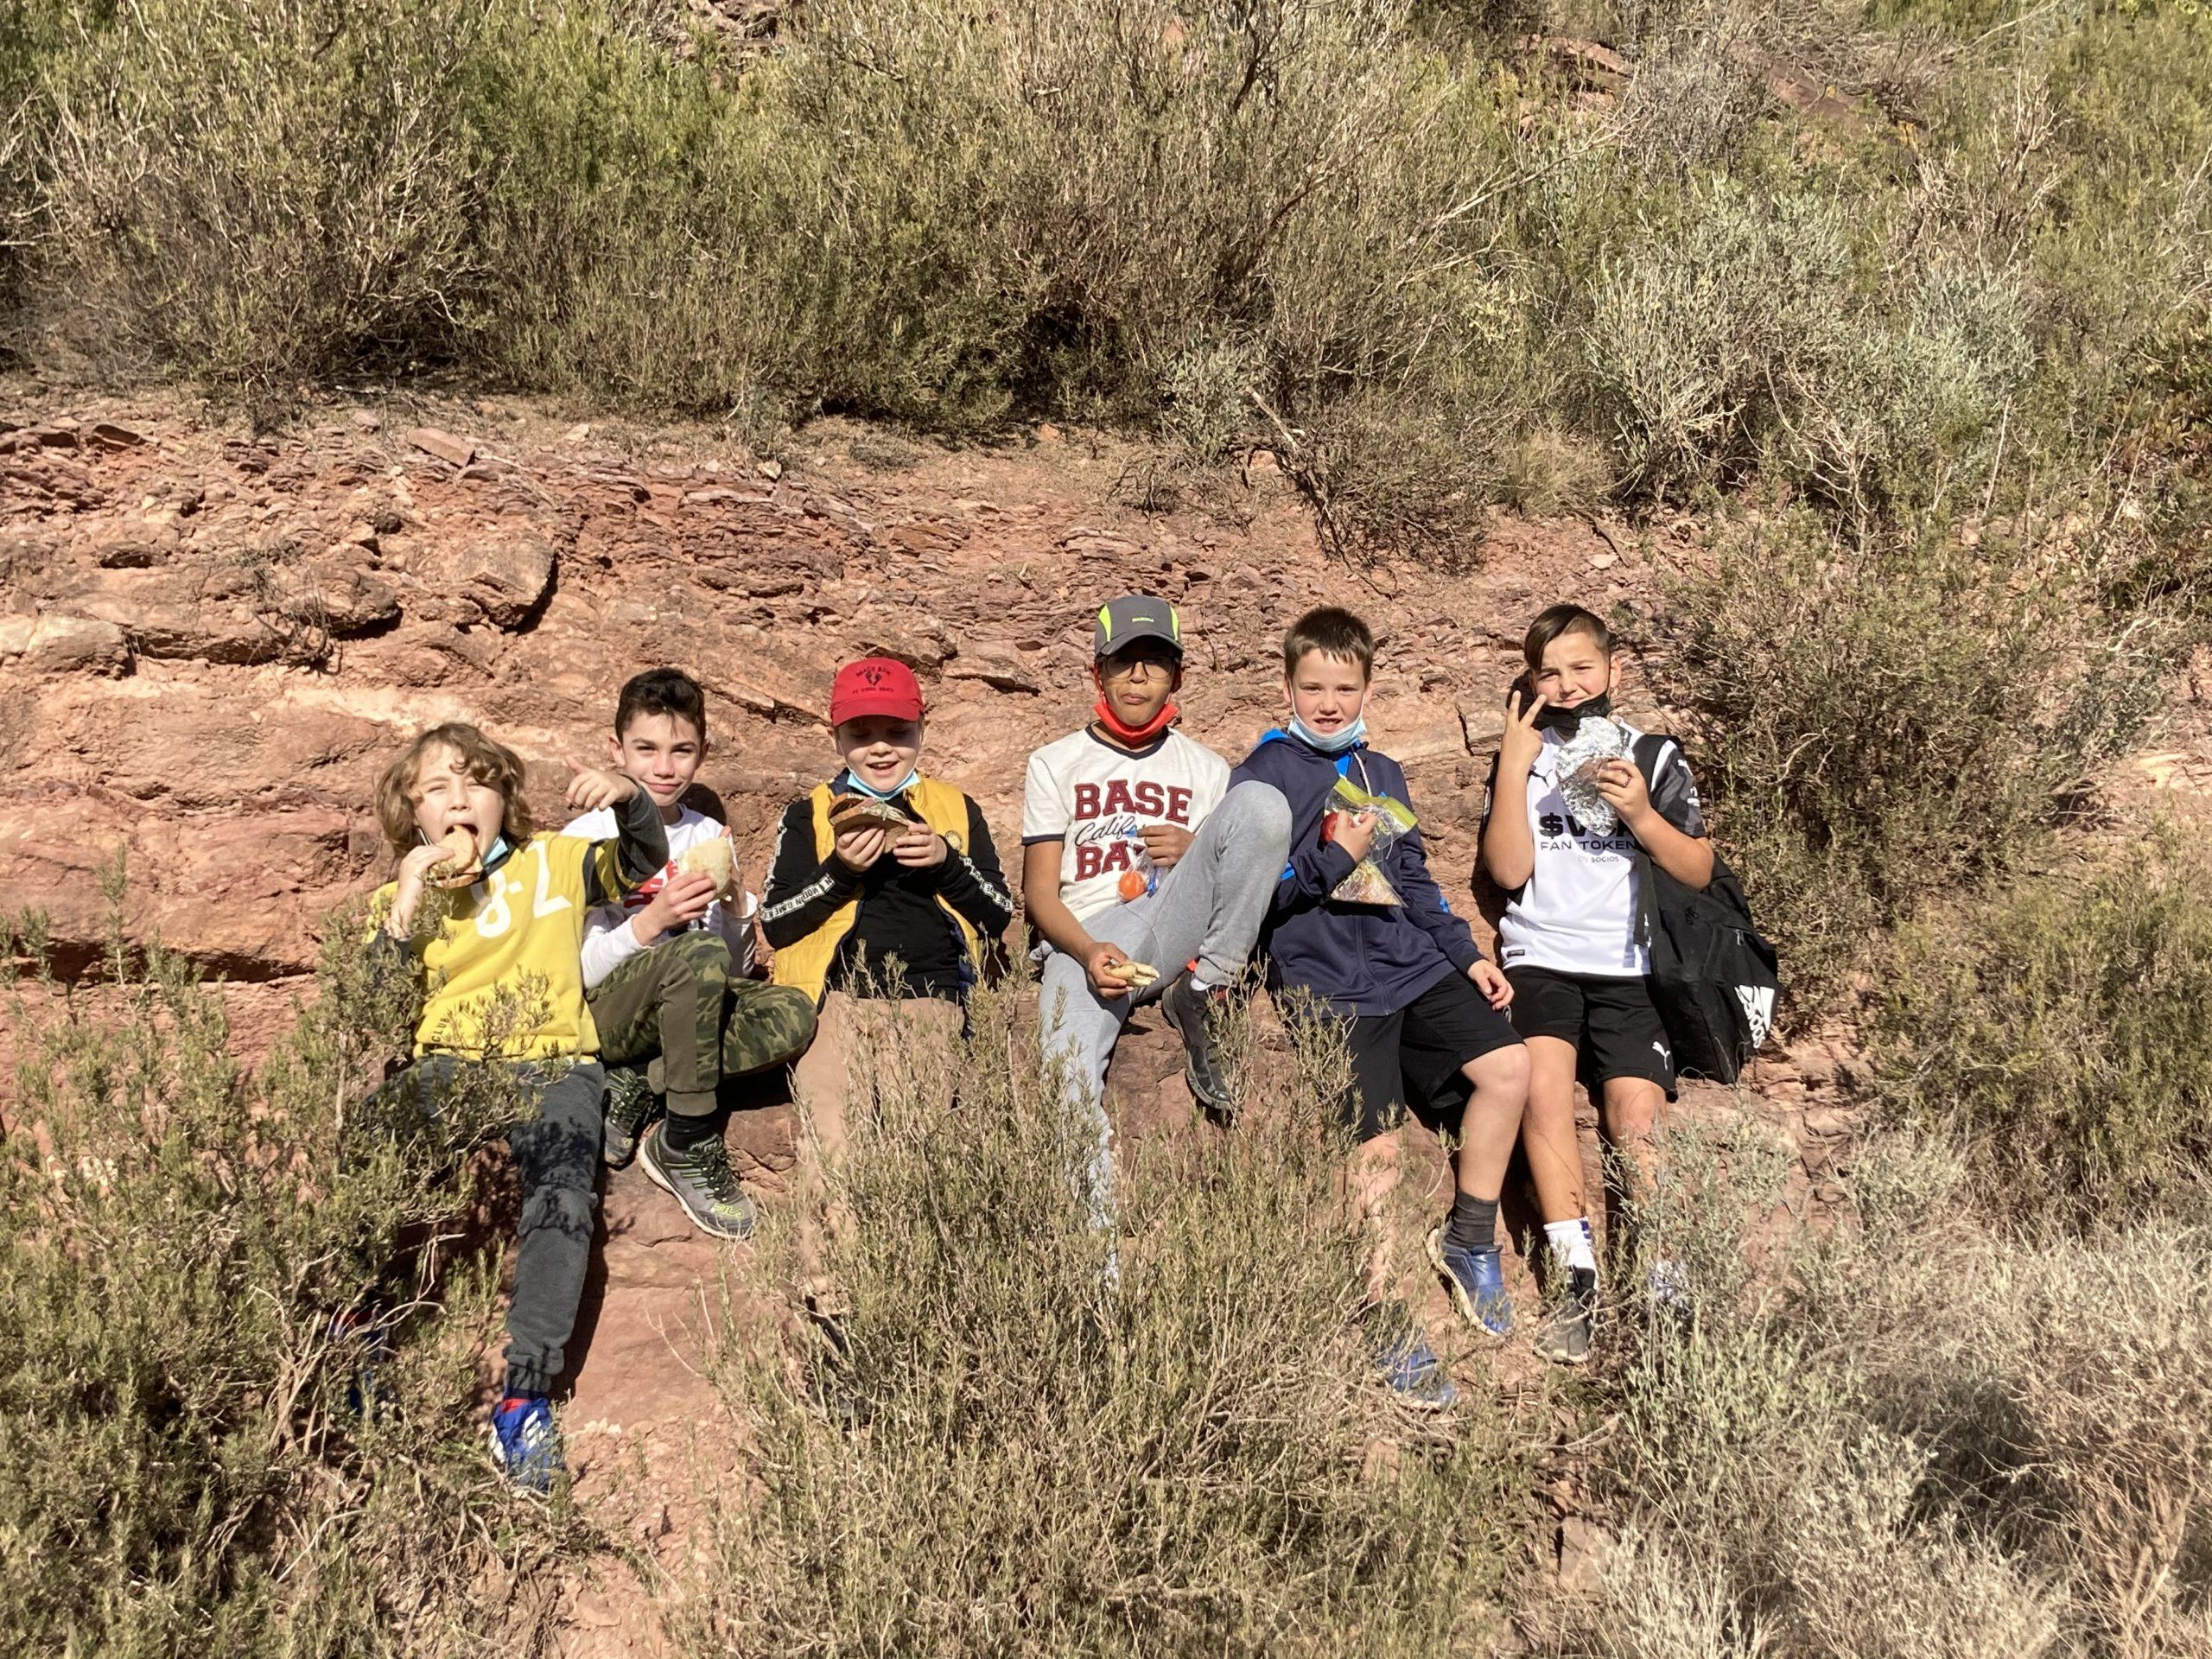 Students during the hike